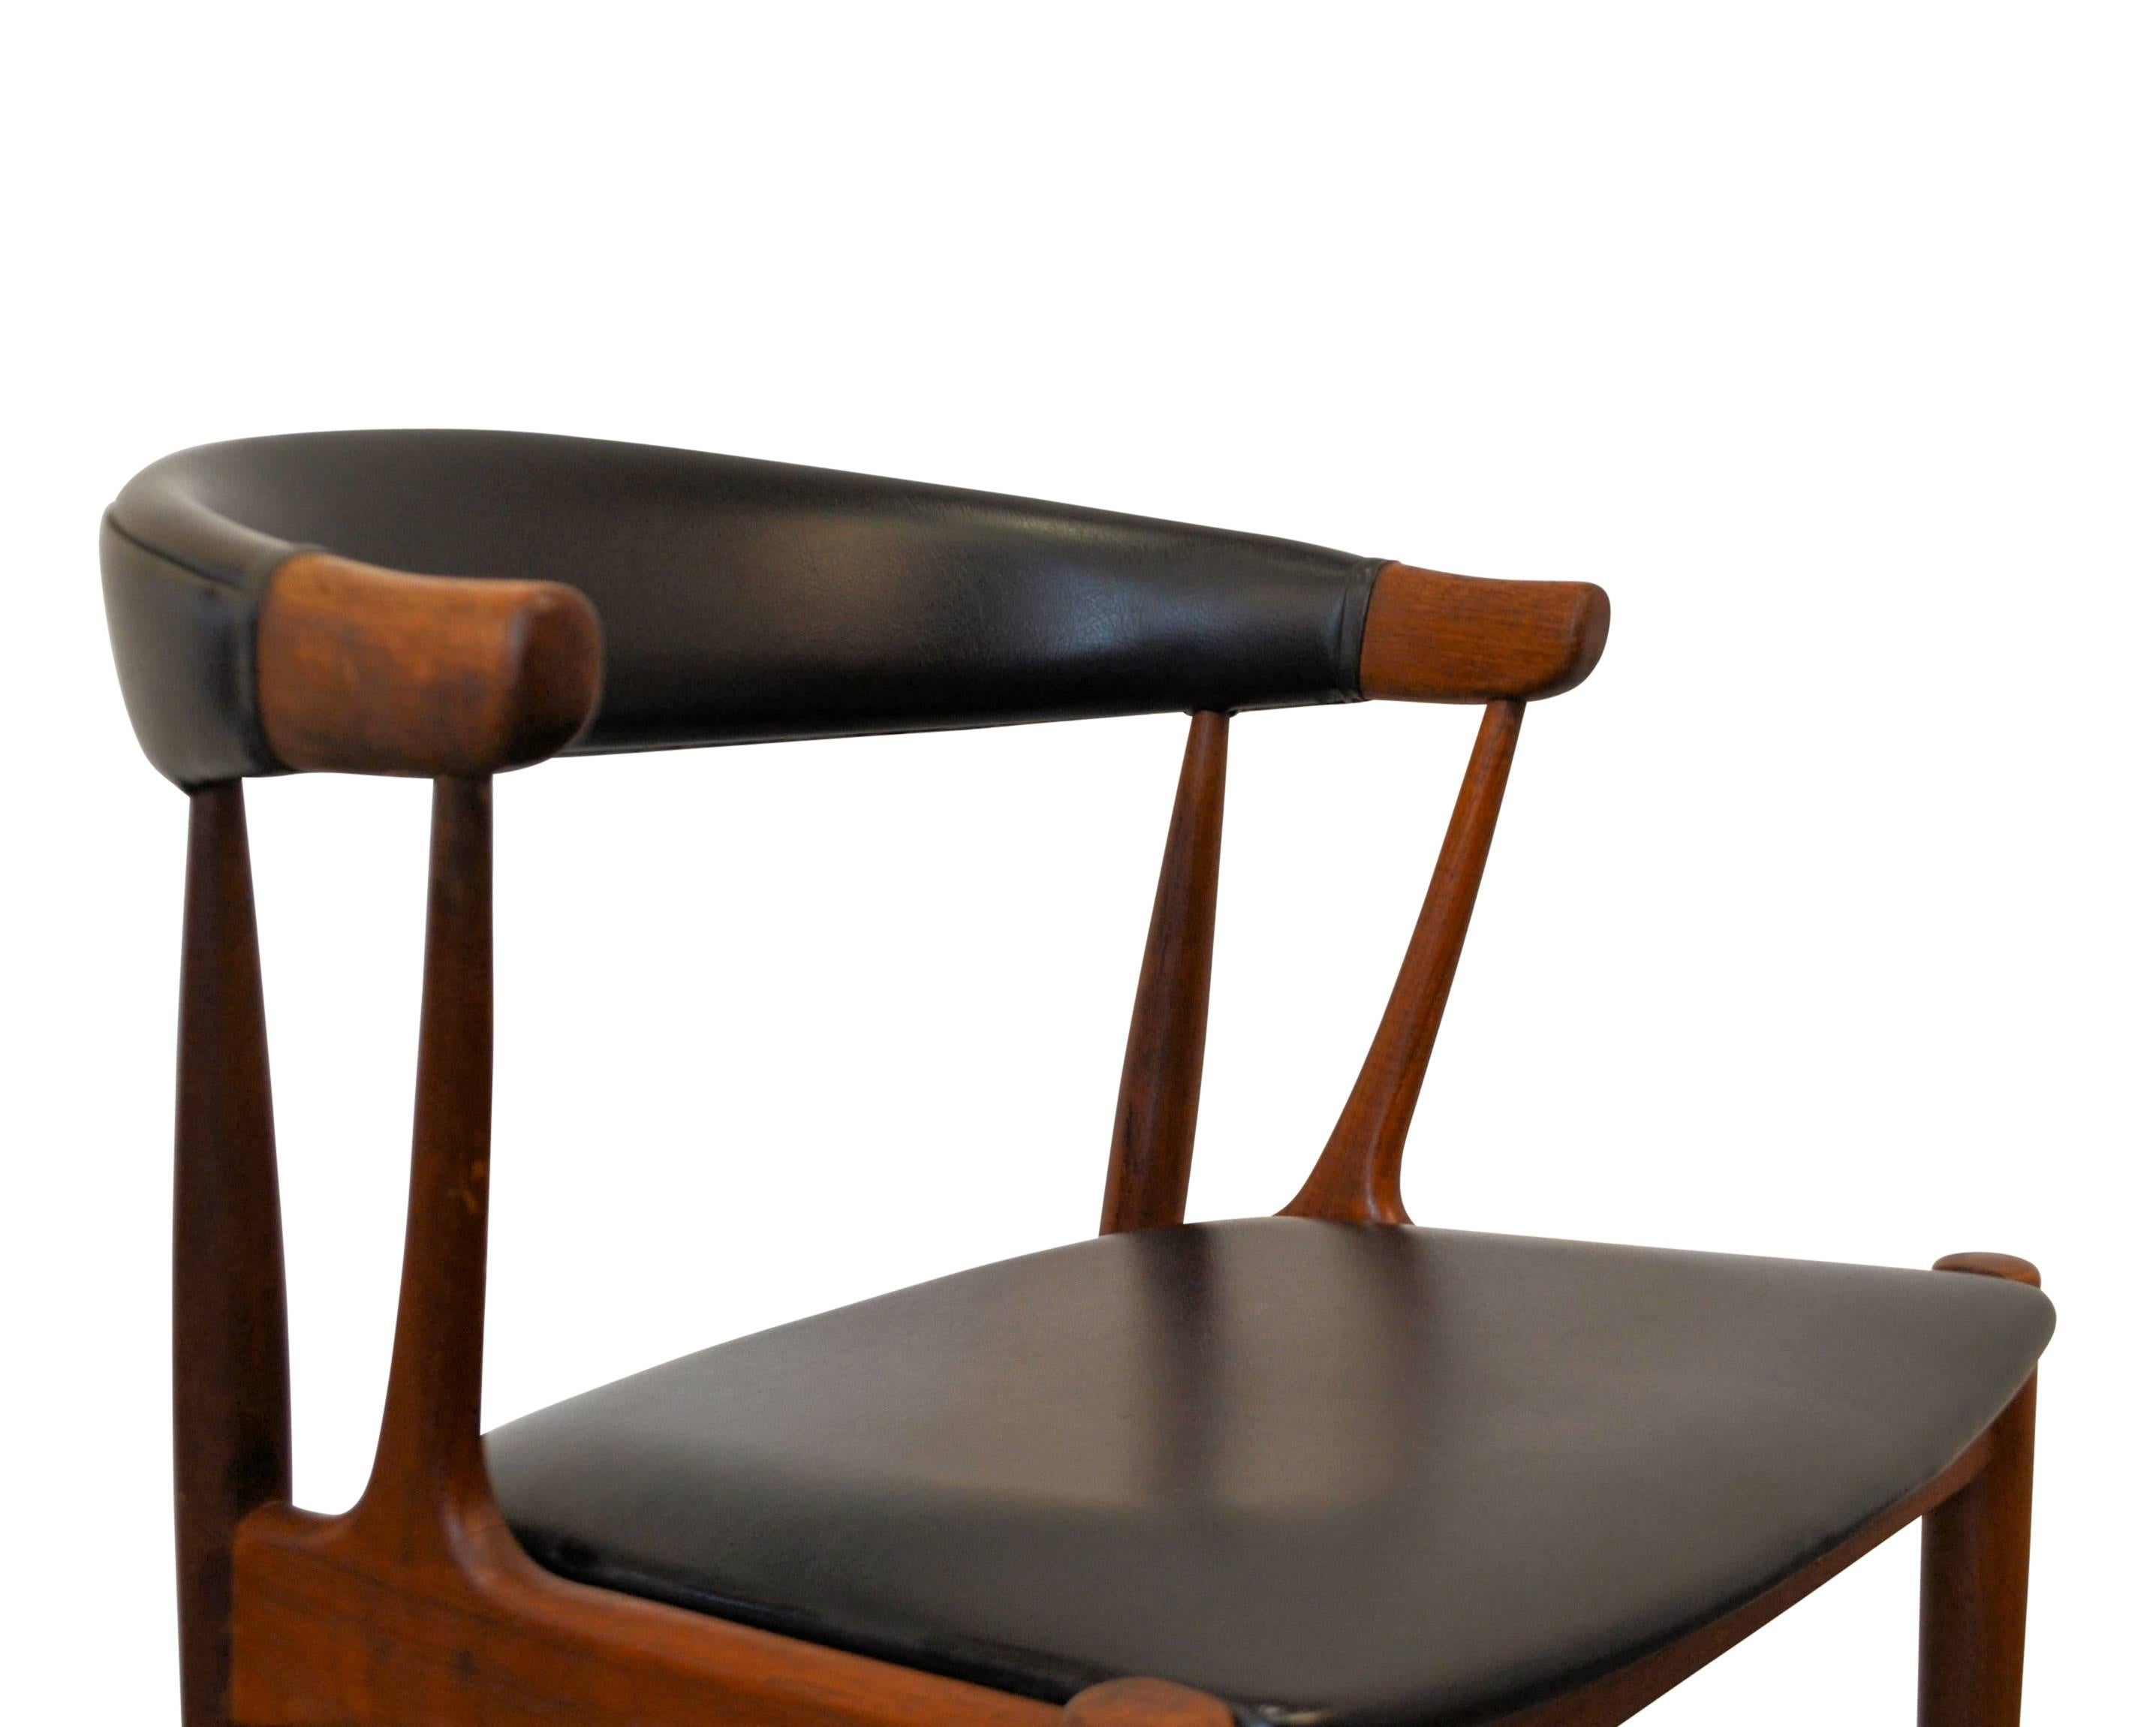 Set of four Danish modern dining chairs designed in the 1960s by worldwide known and appreciated furniture designer Johannes Andersen. His designs are considered high end Danish modern design. These chairs feature Andersen’s characteristic organic